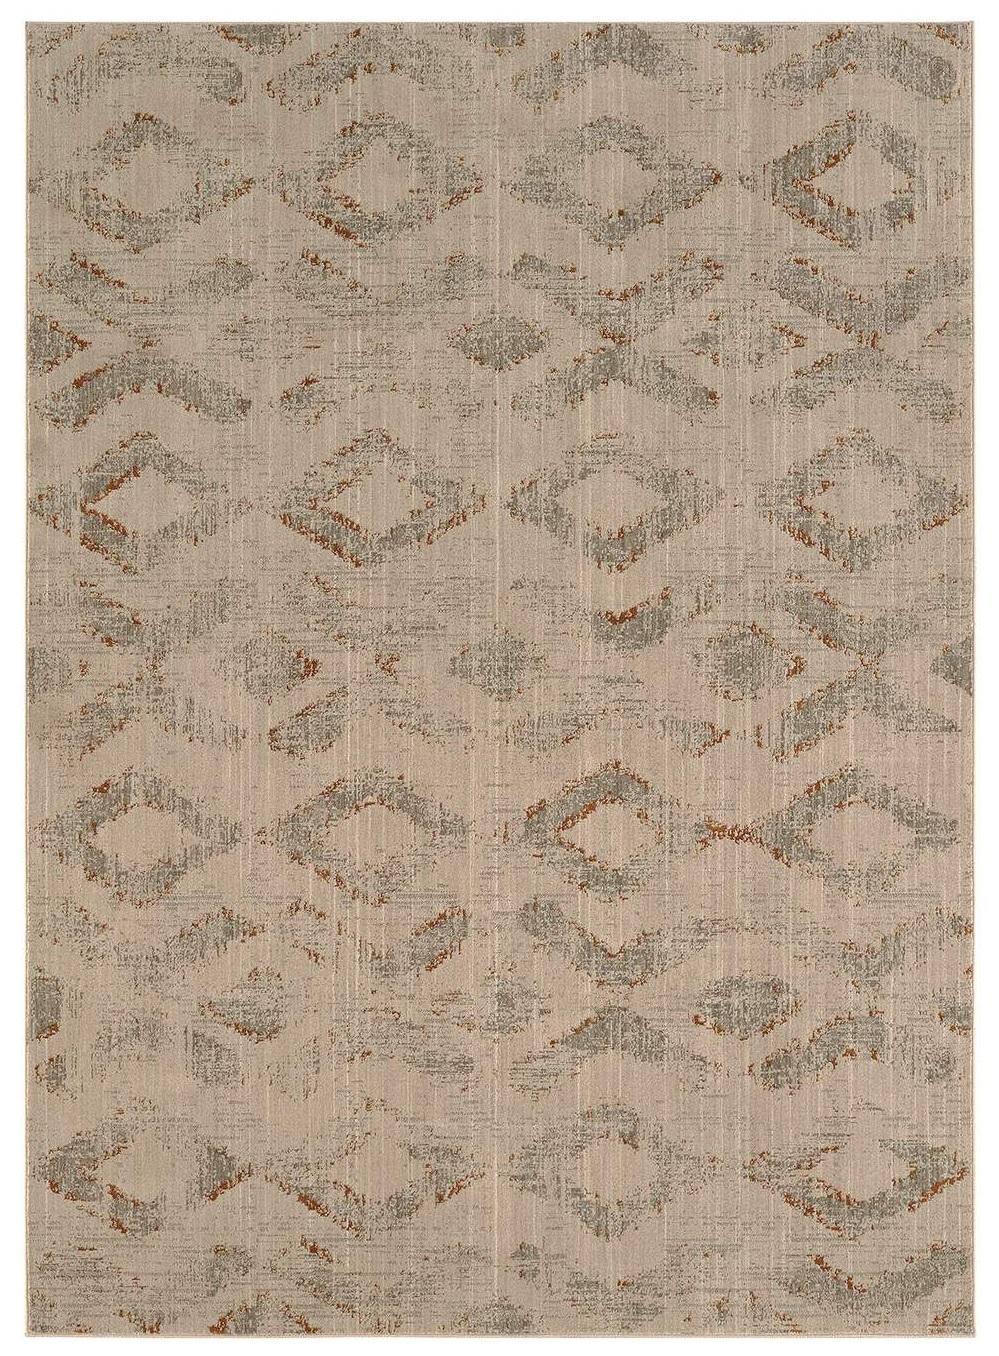 Contemporary Area Rug RG8166-S Wilhelm RG8166-S in Gray 